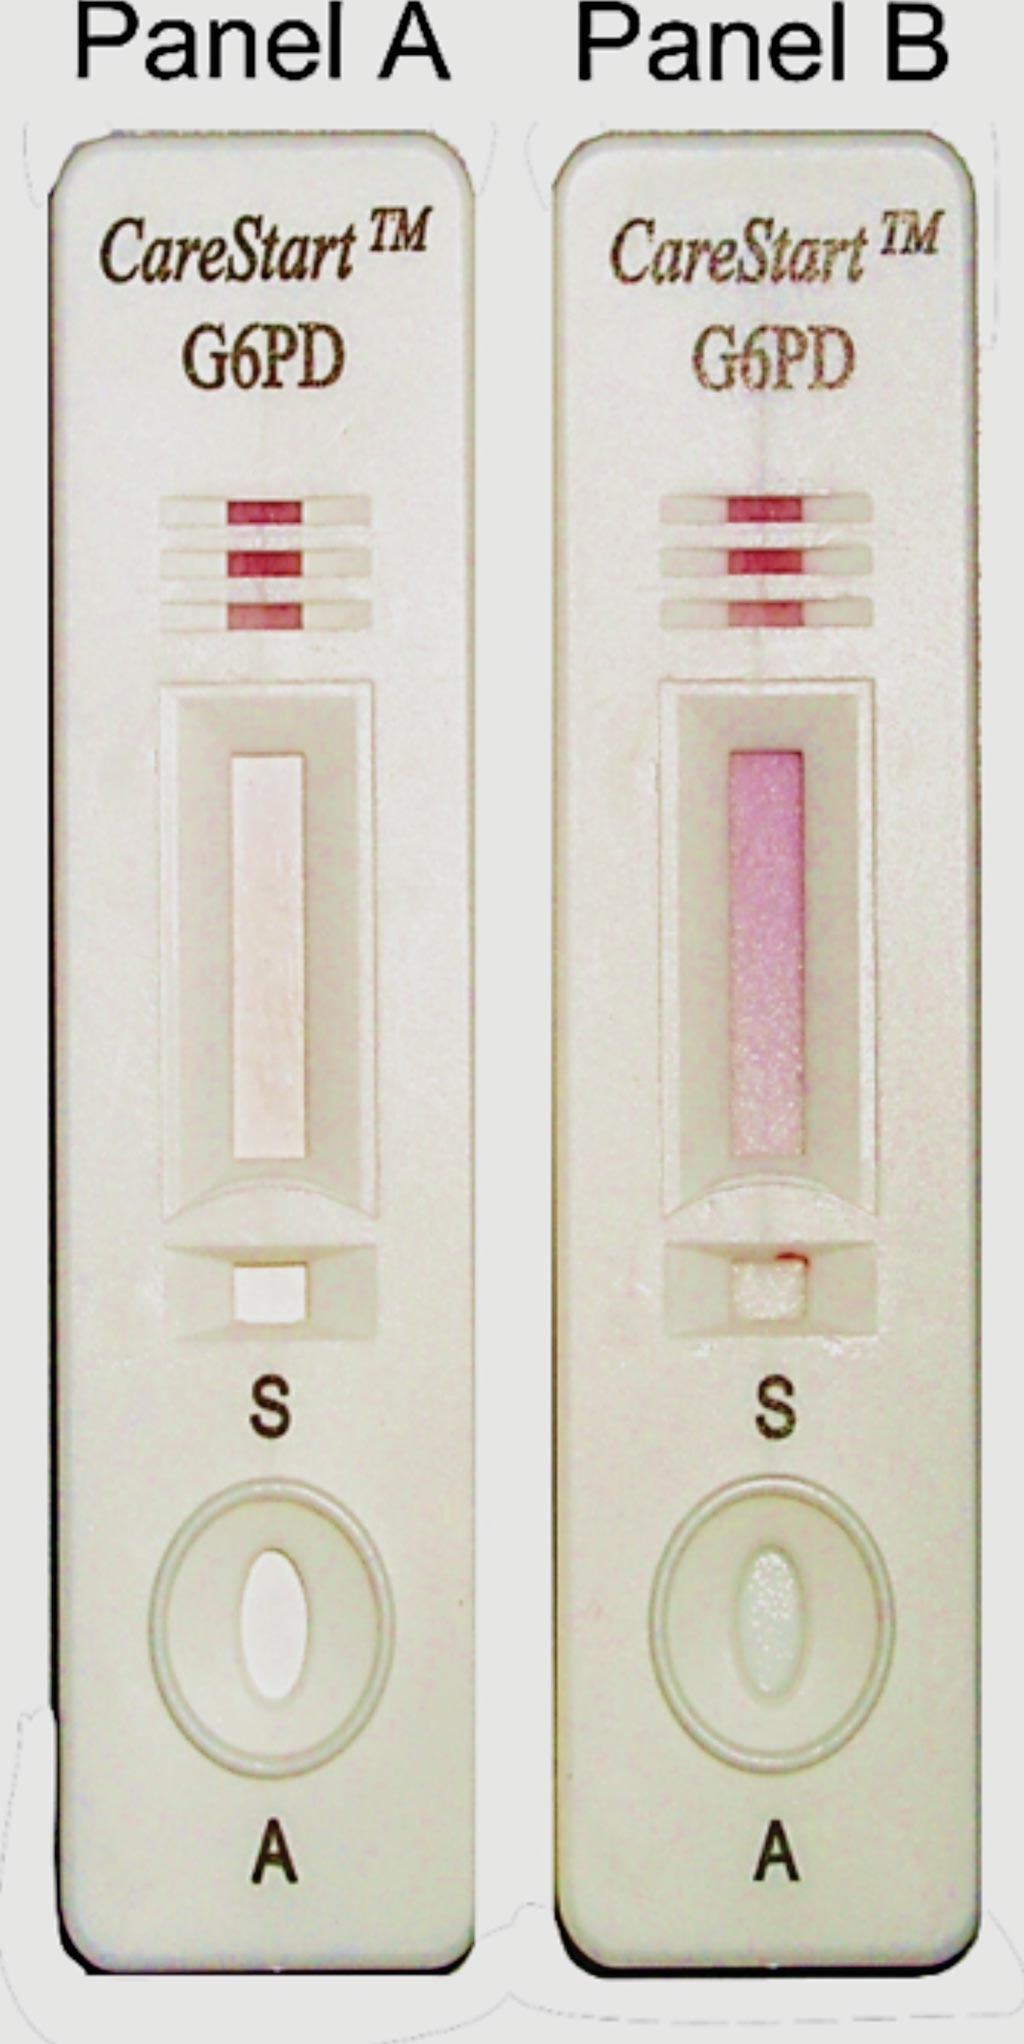 Image: The qualitative point-of-care test CareStart G6PD RDT is a visual screening test that identifies G6PD deficient patients using whole blood sample. Panel A, no color change for sample with deficient G6PD enzymatic activity; Panel B, distinct purple color for sample with normal G6PD enzymatic activity (Photo courtesy of Access Bio).